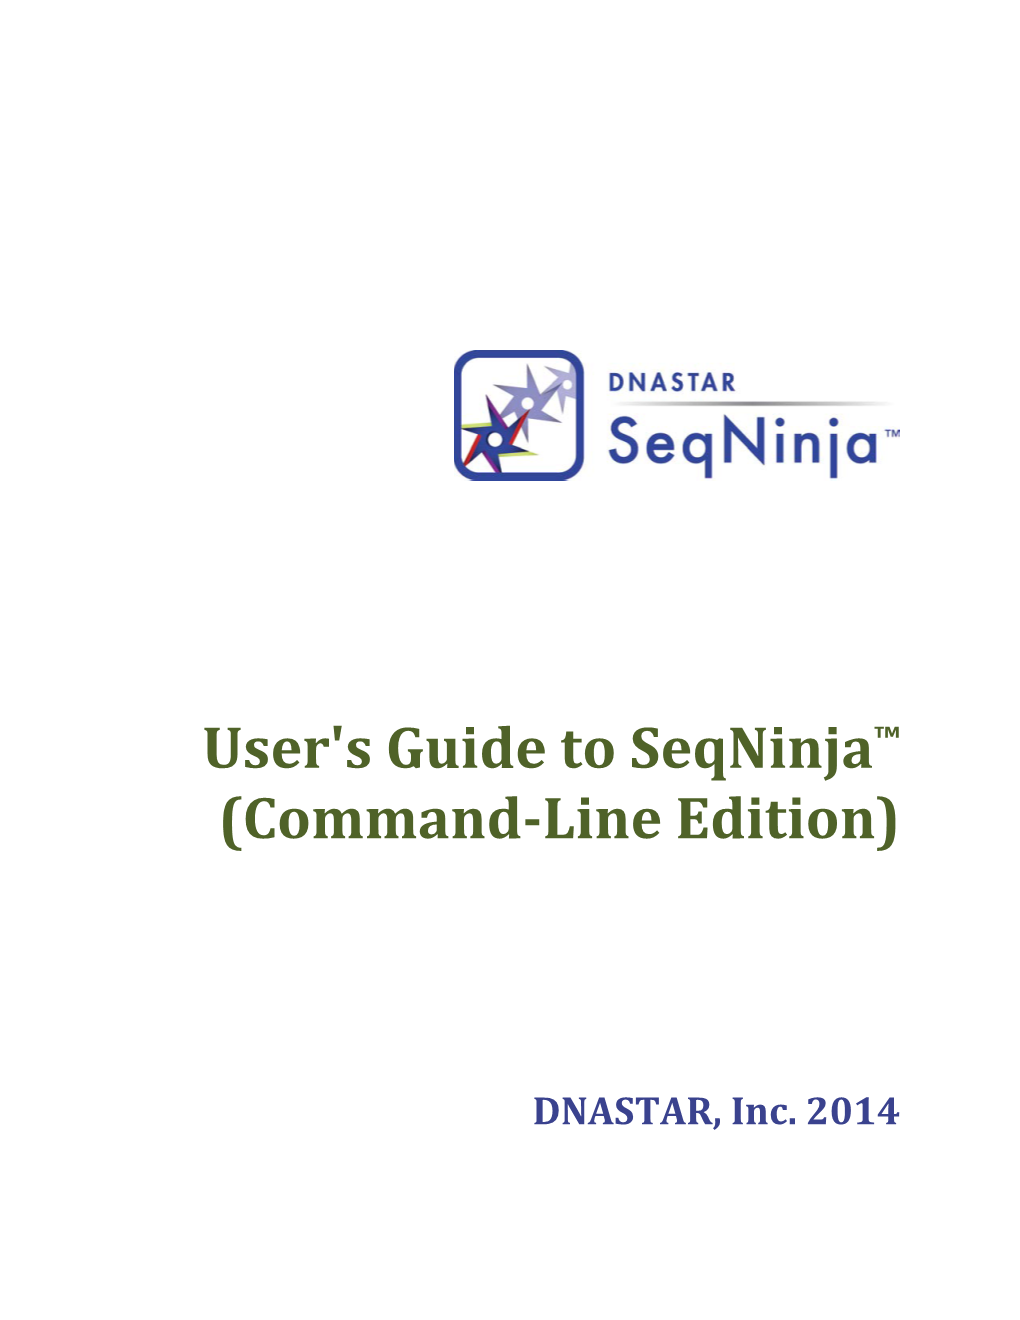 User's Guide to Seqninja™ (Command-Line Edition)